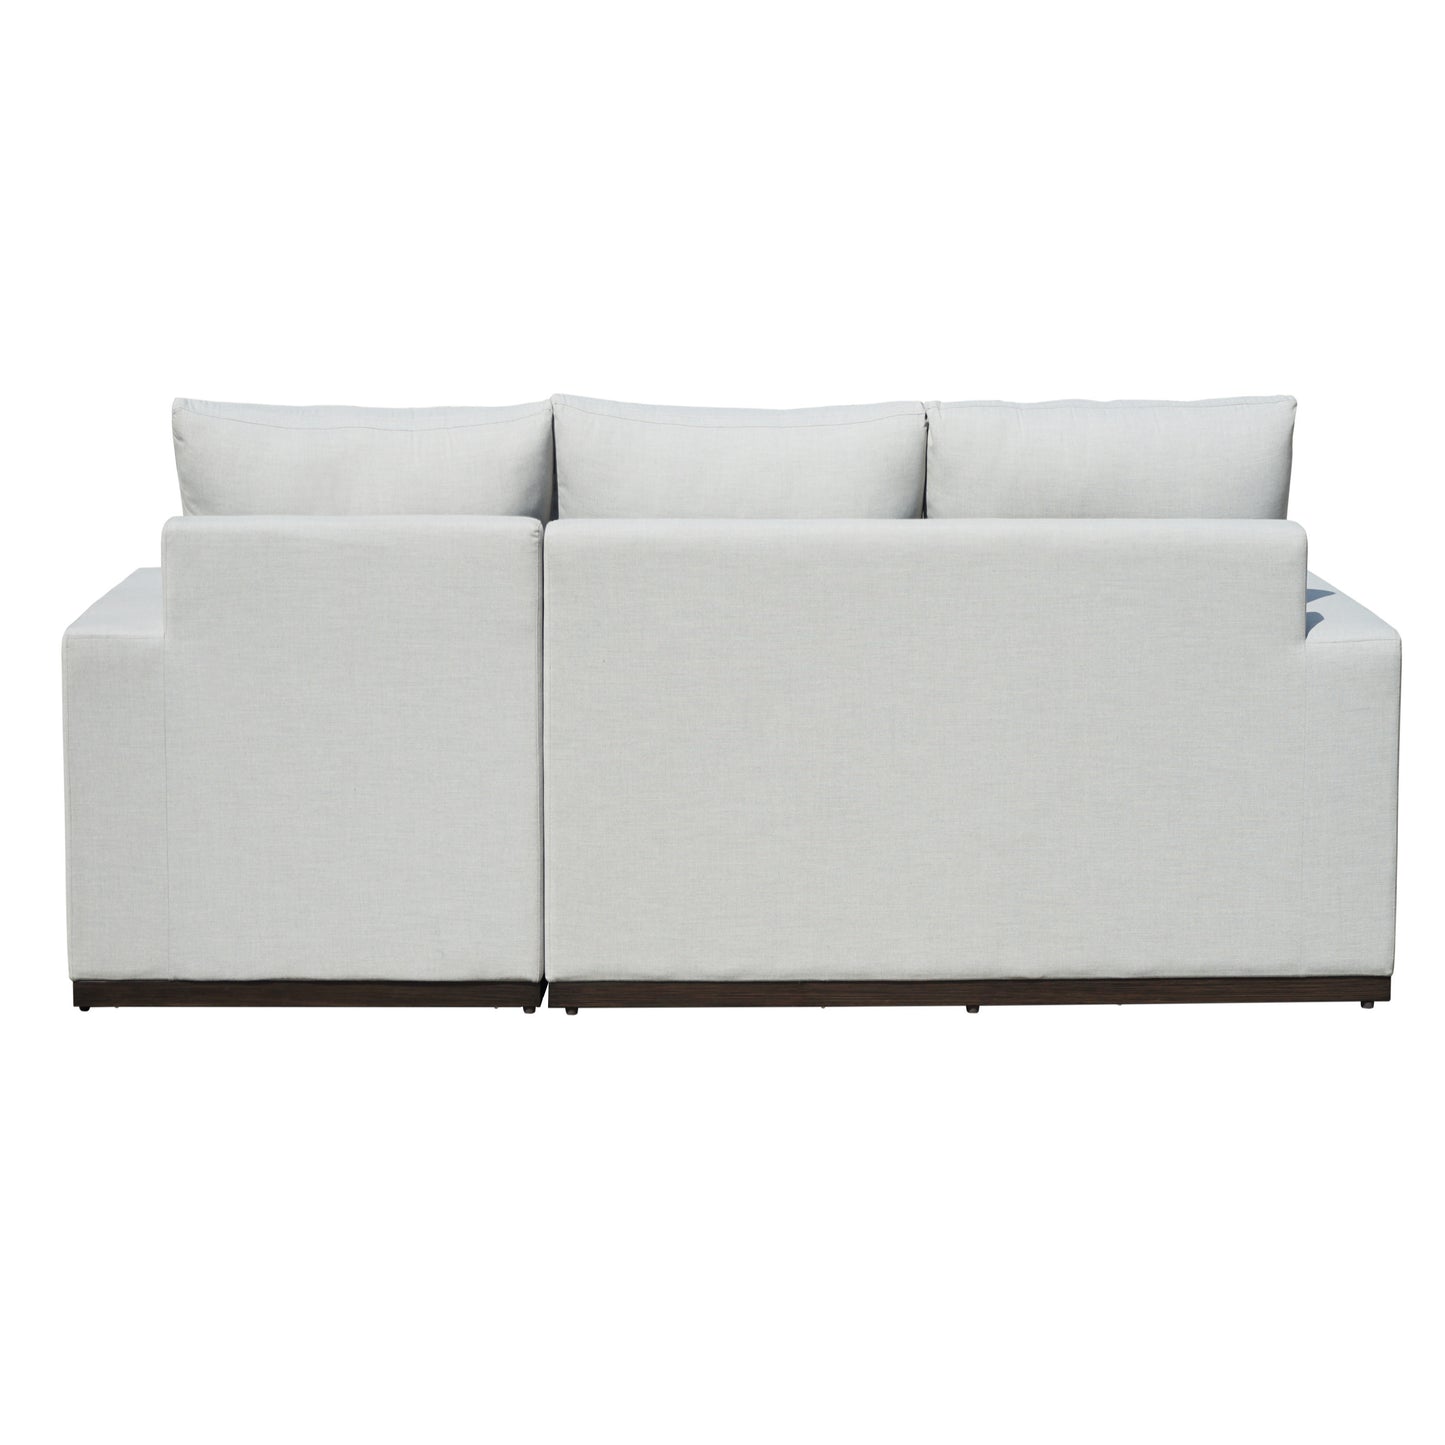 Luxurious Outdoor Chofa/Sofa Chaise - Generously Scaled, Stain and Fade-Resistant Solution-Dyed Acrylic Cover